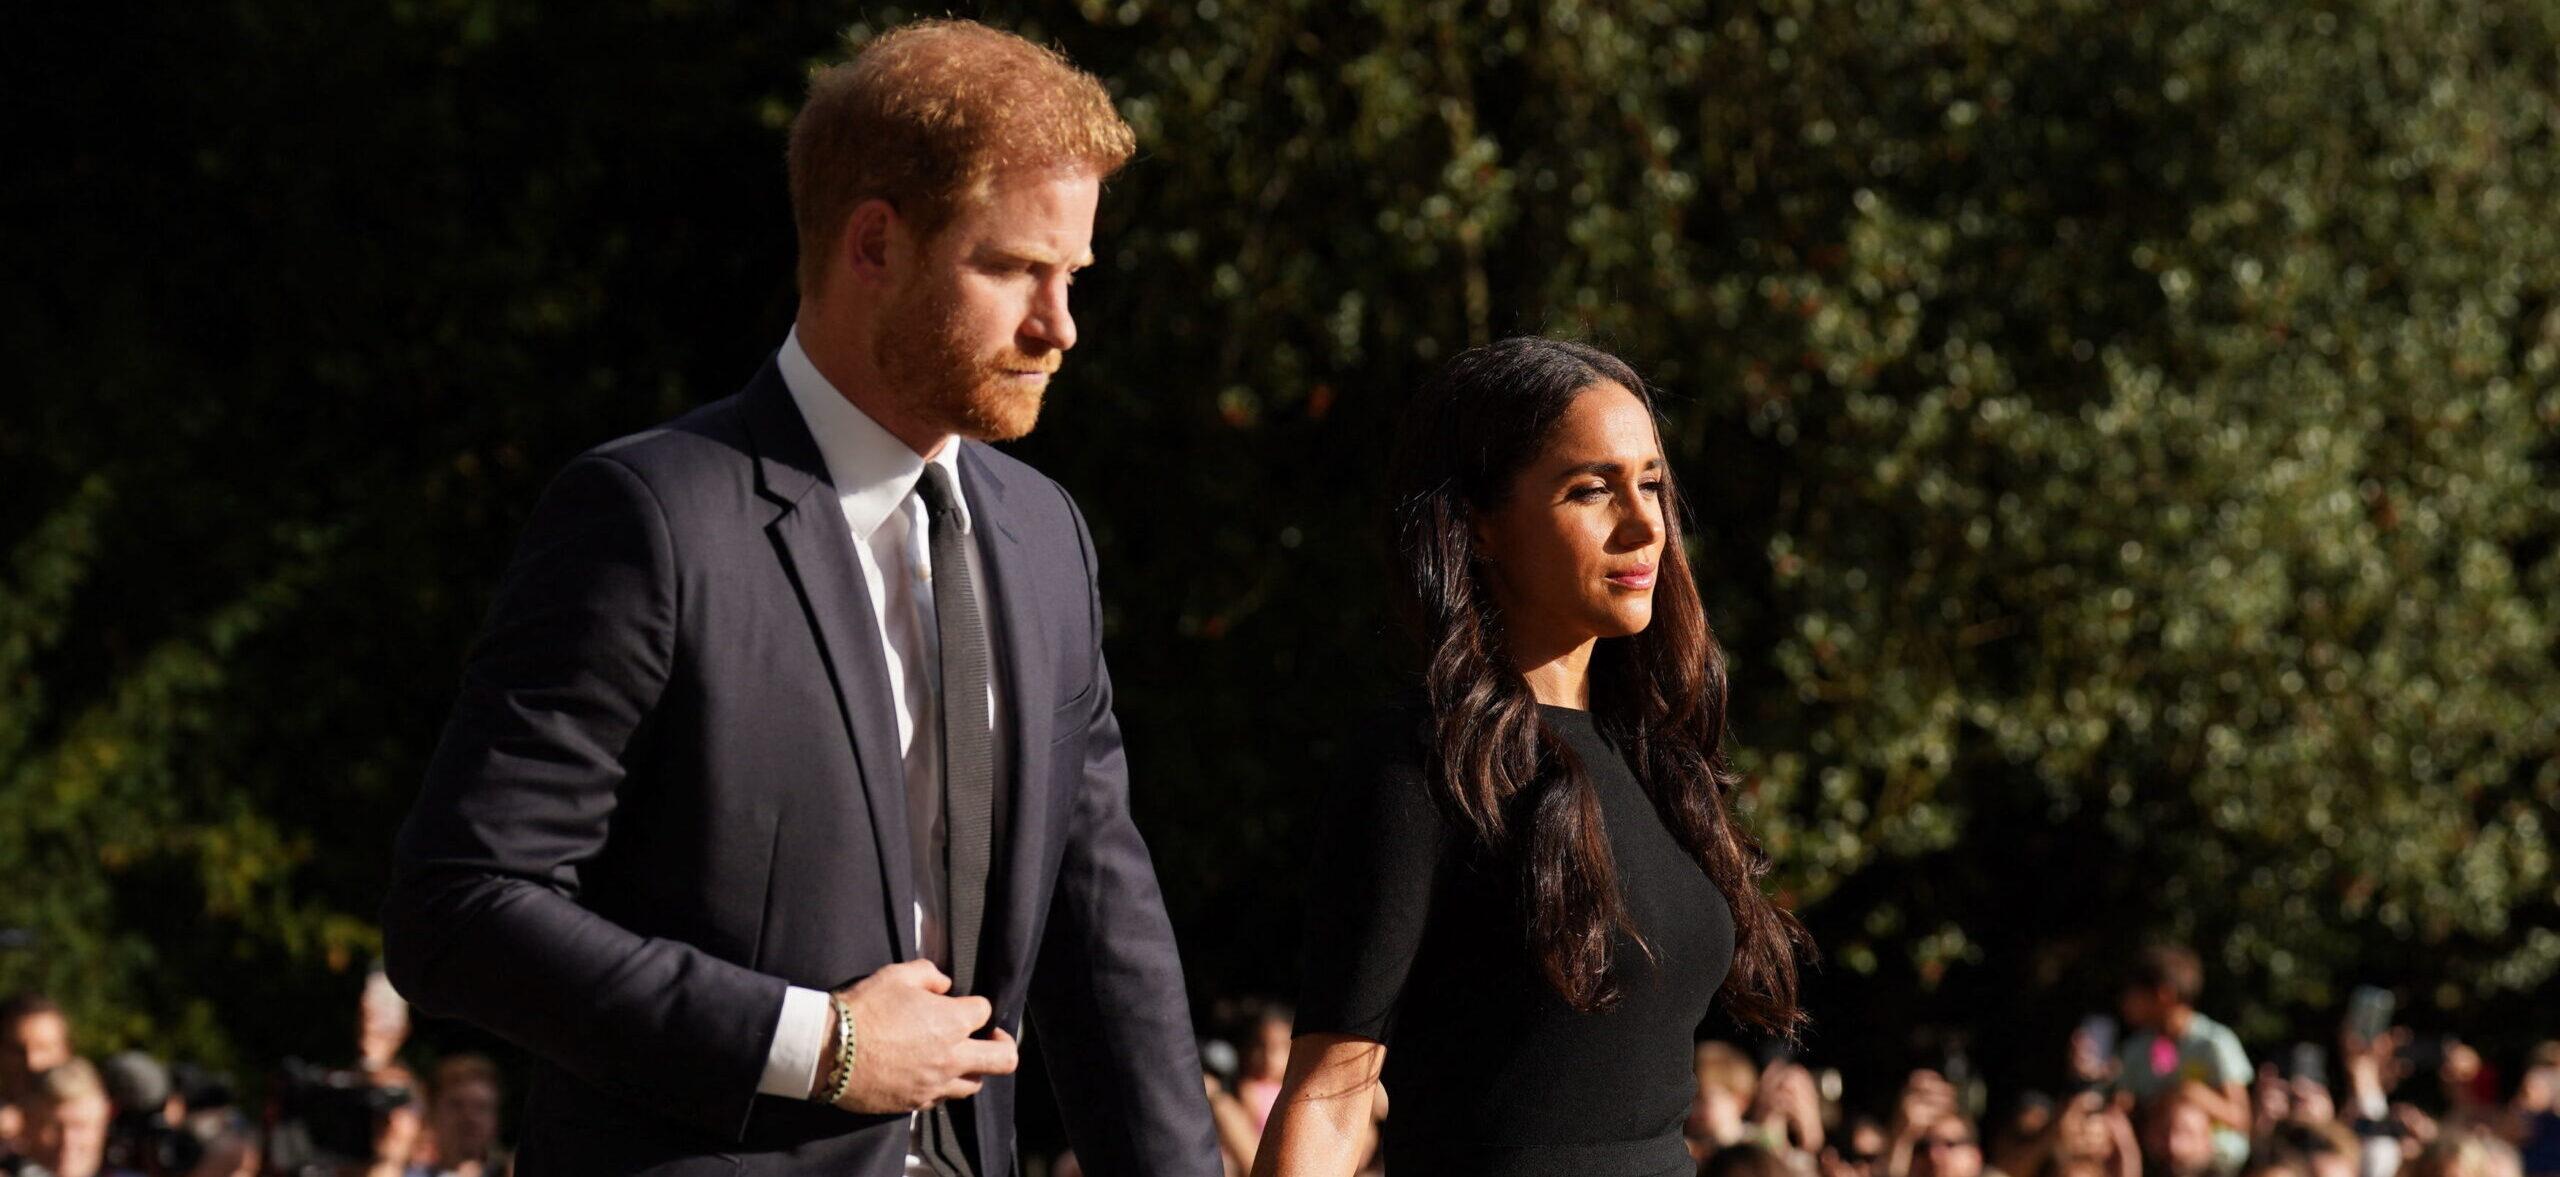 Harry & Meghan Markle Ready To Leave Montecito After Celeb Friends Snub Them?!